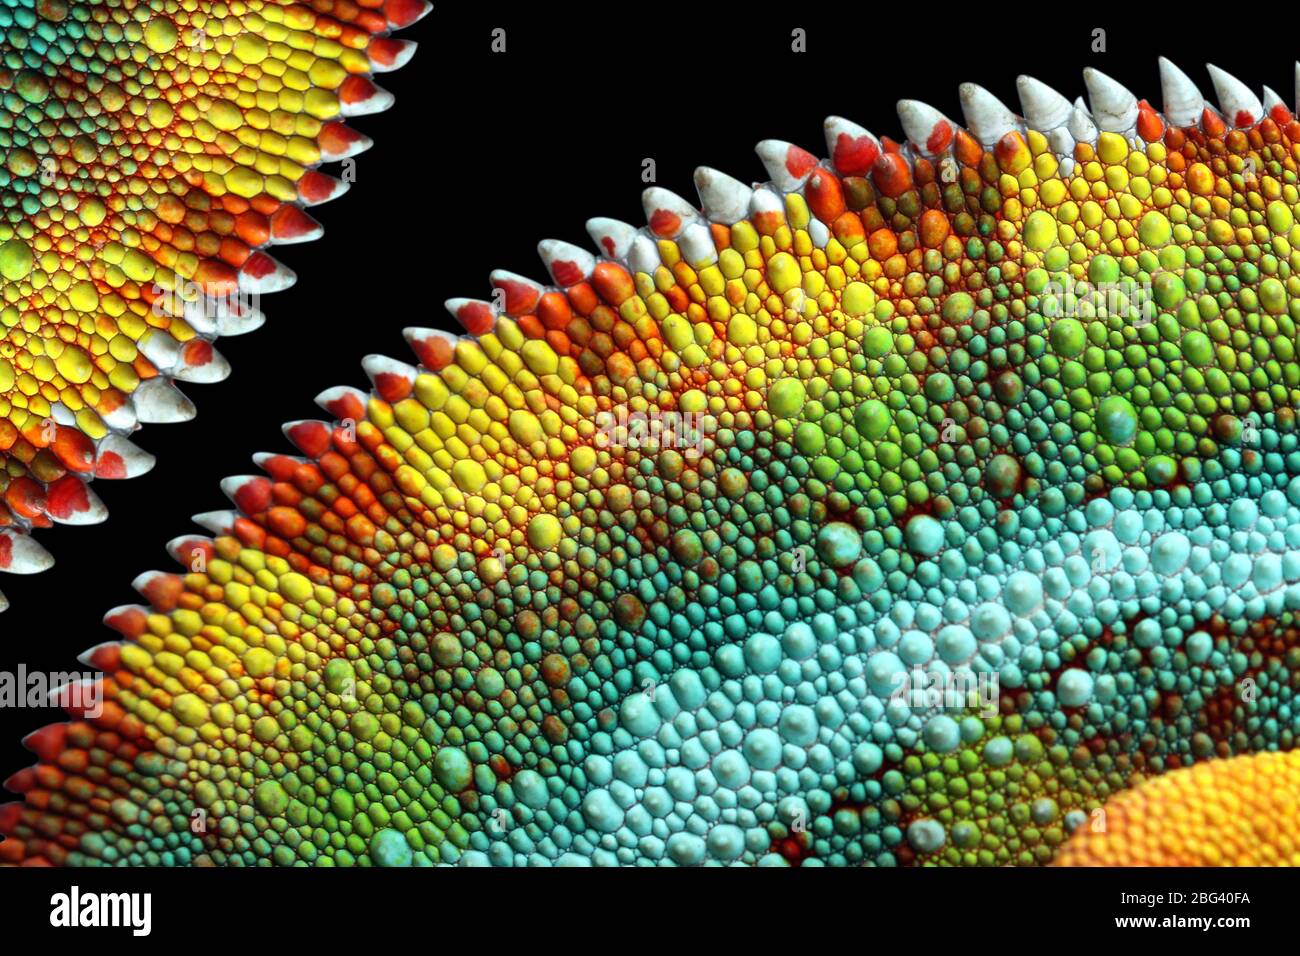 Close-up of a panther chameleon skin, Indonesia Stock Photo